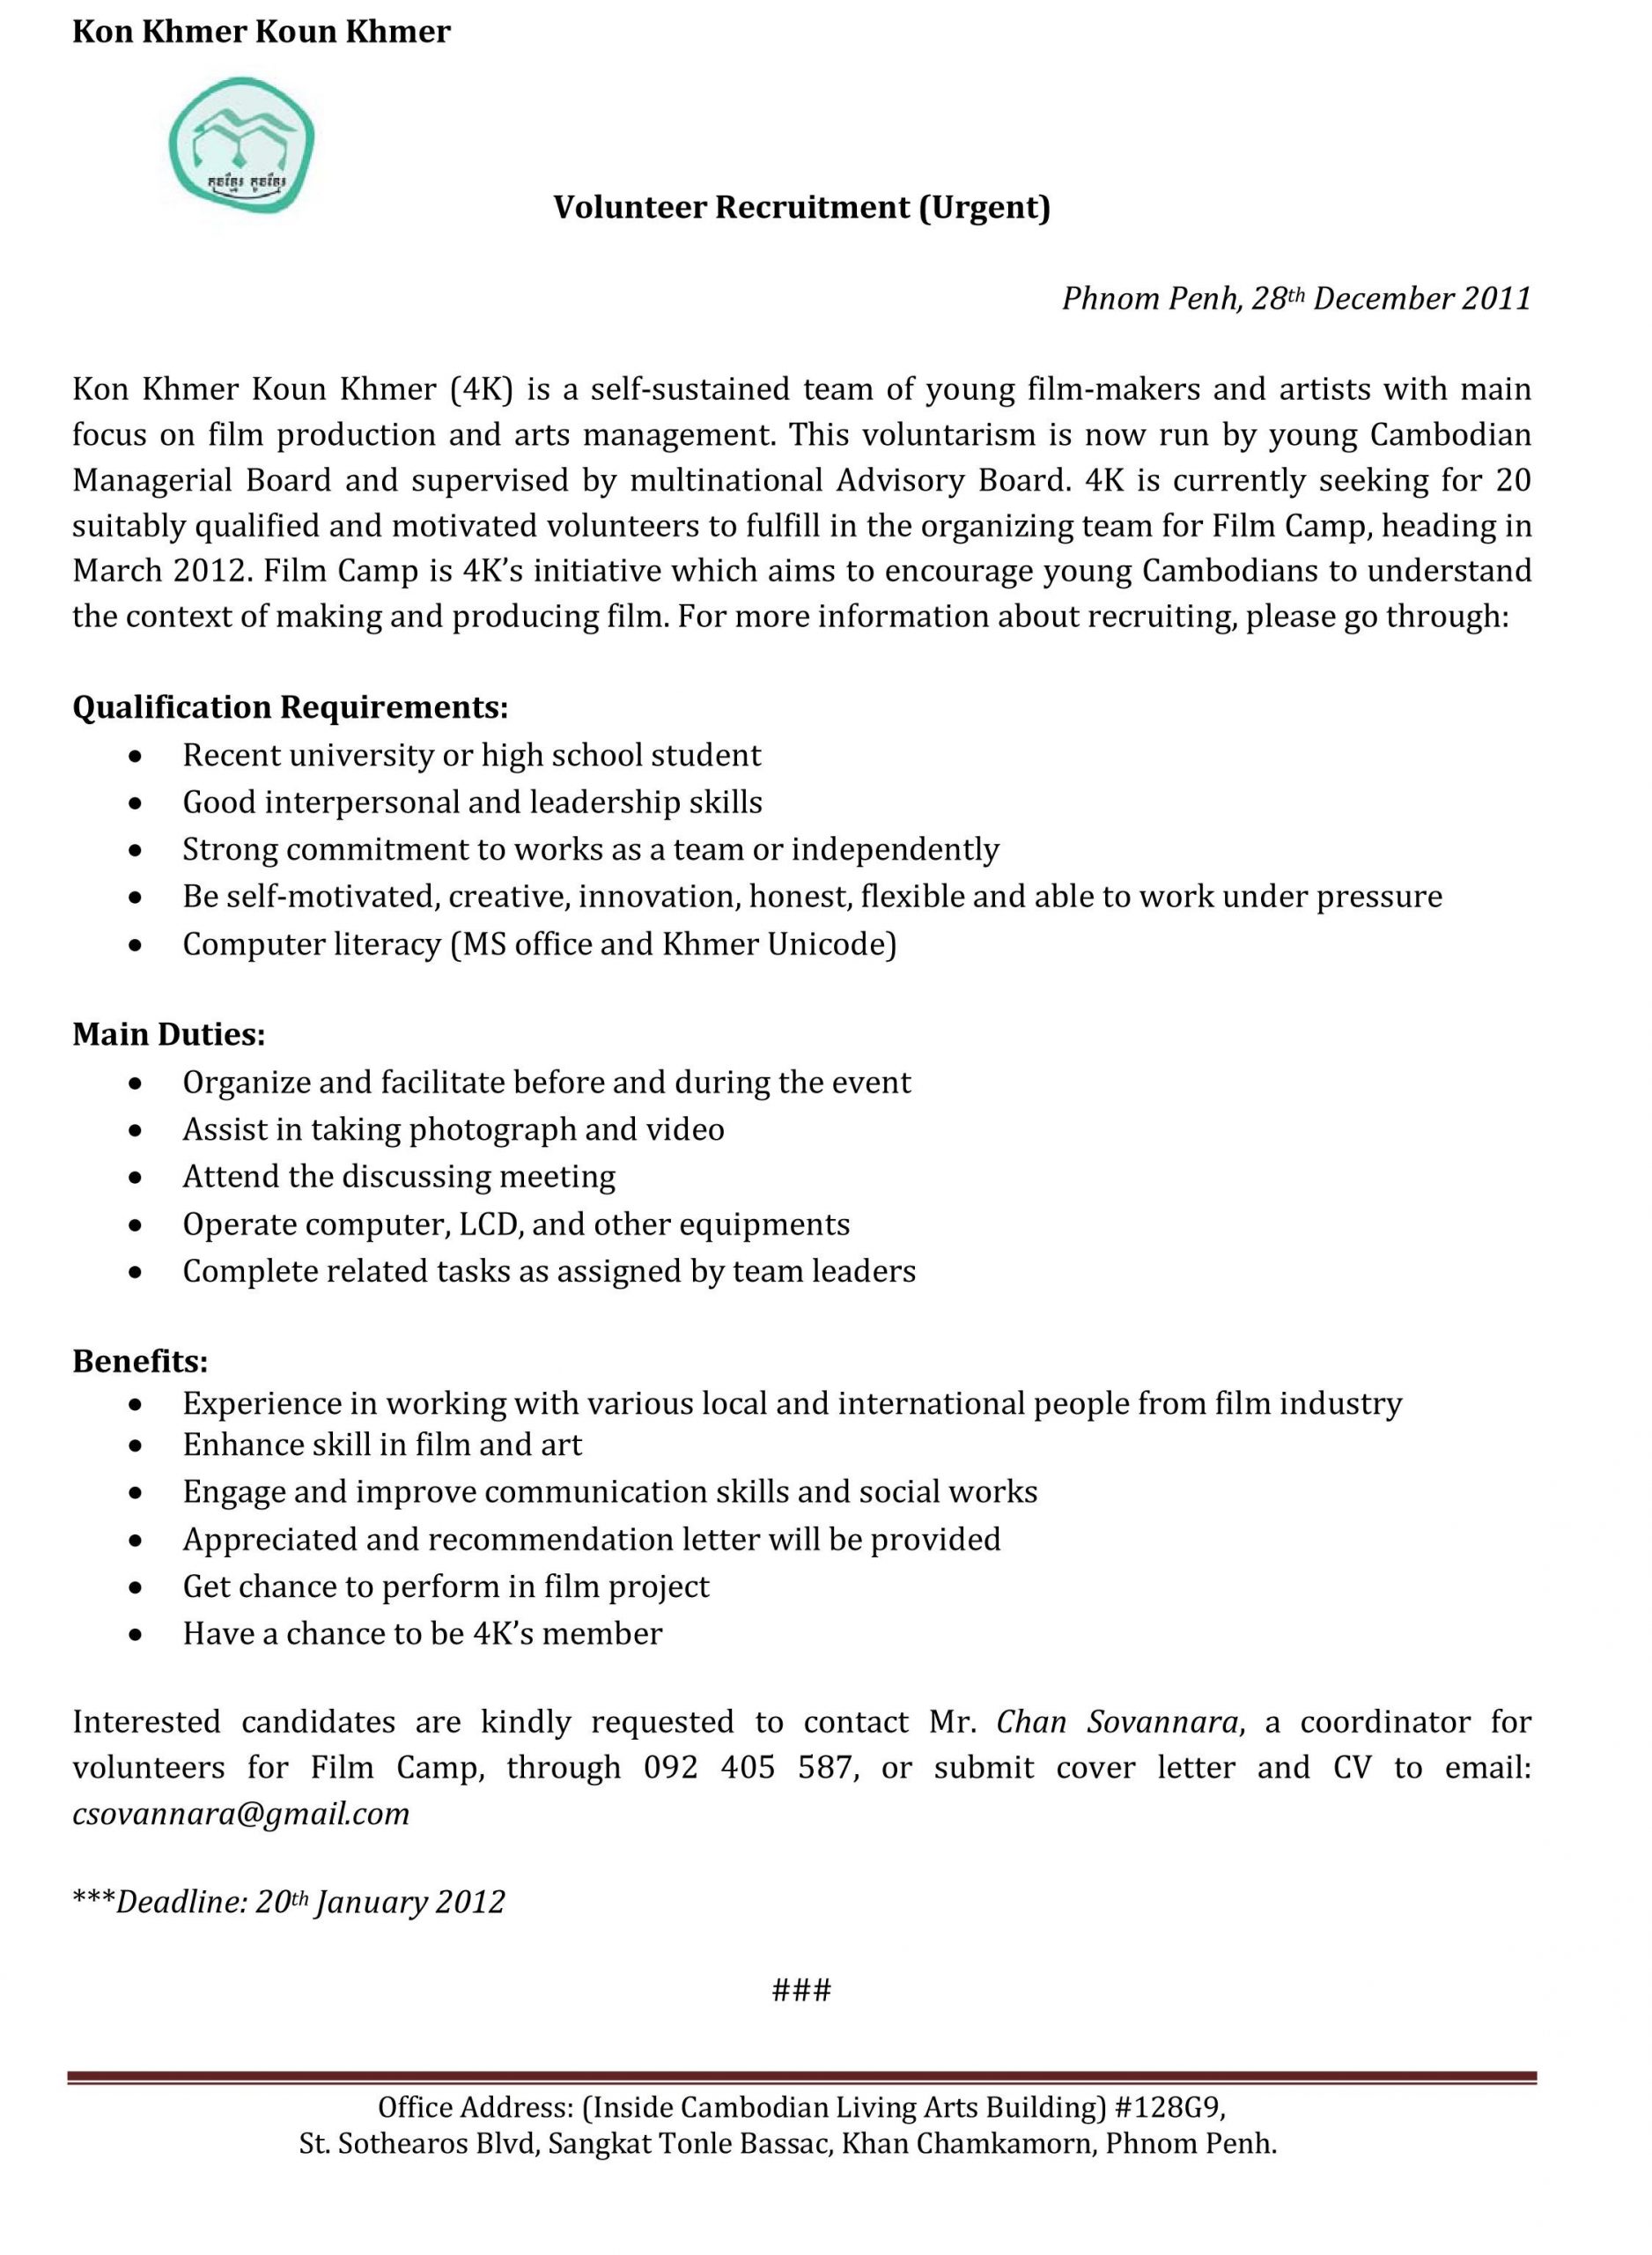 Sample Application Letter For Volunteer Position with dimensions 2248 X 3067